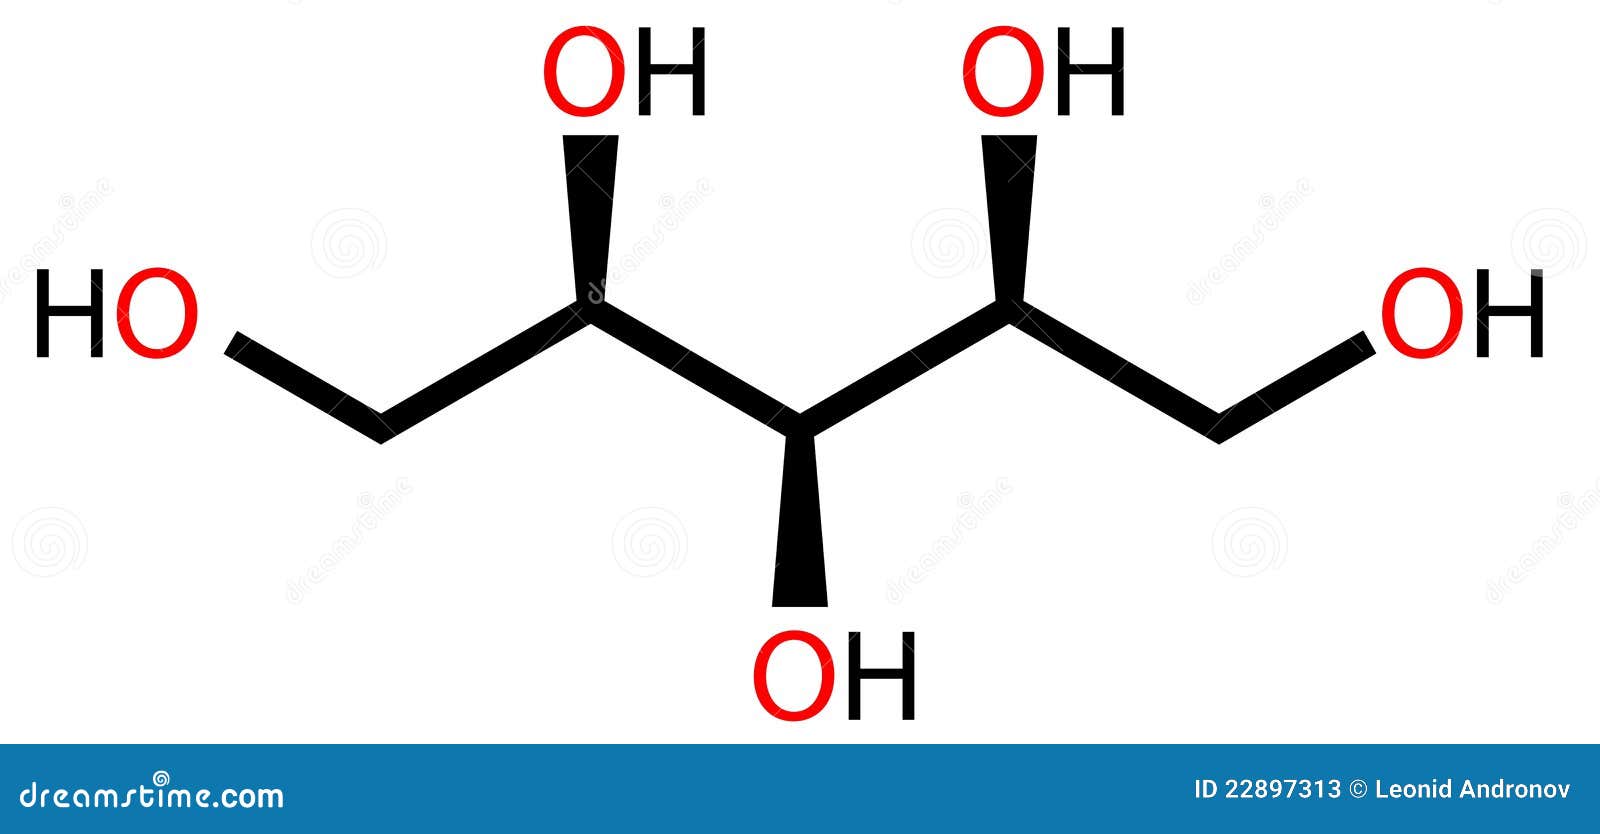 Xylitol structural formula stock vector. Illustration of diet - 22897313
